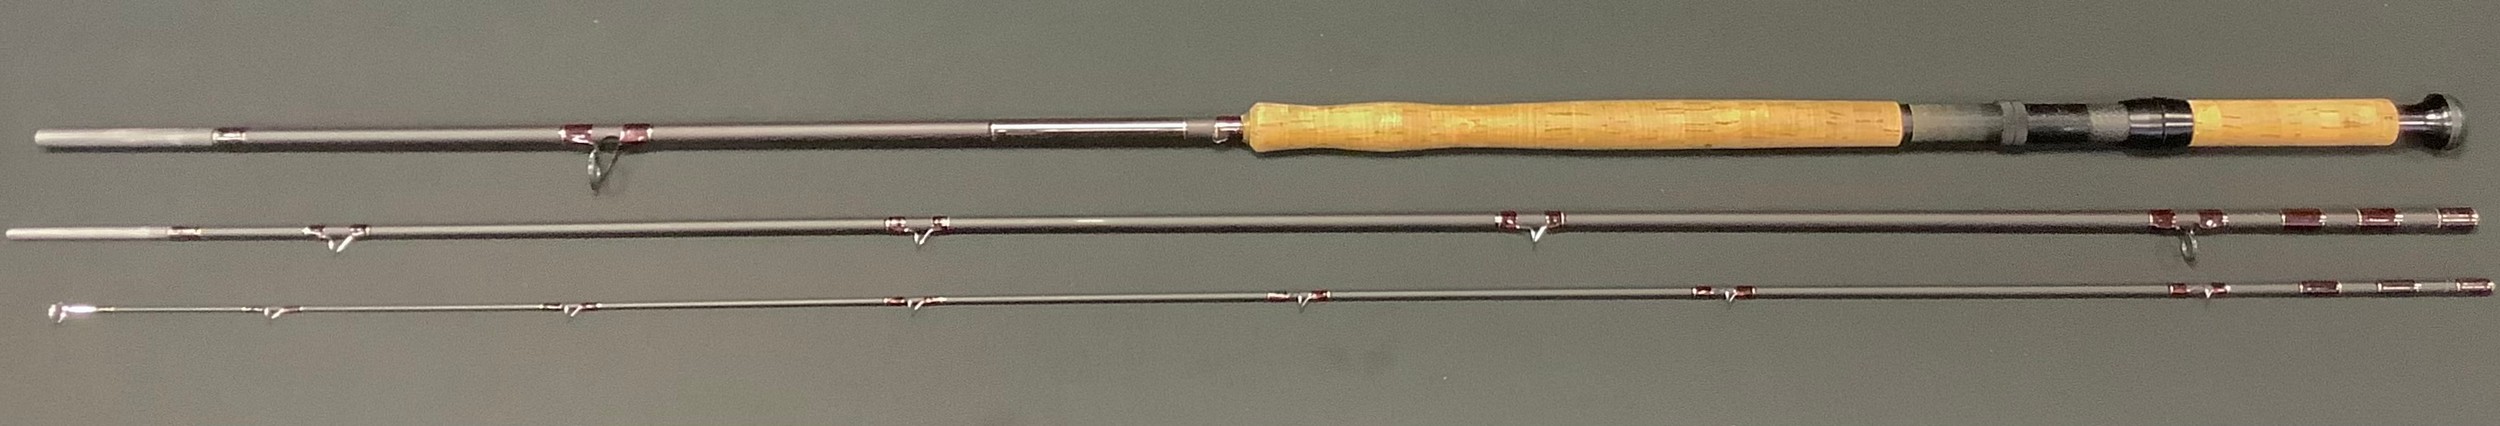 Fishing equipment - A Bruce and Walker 'Ghillie', 12' 4" Powerlite Speycaster, fly fishing rod. - Image 2 of 2